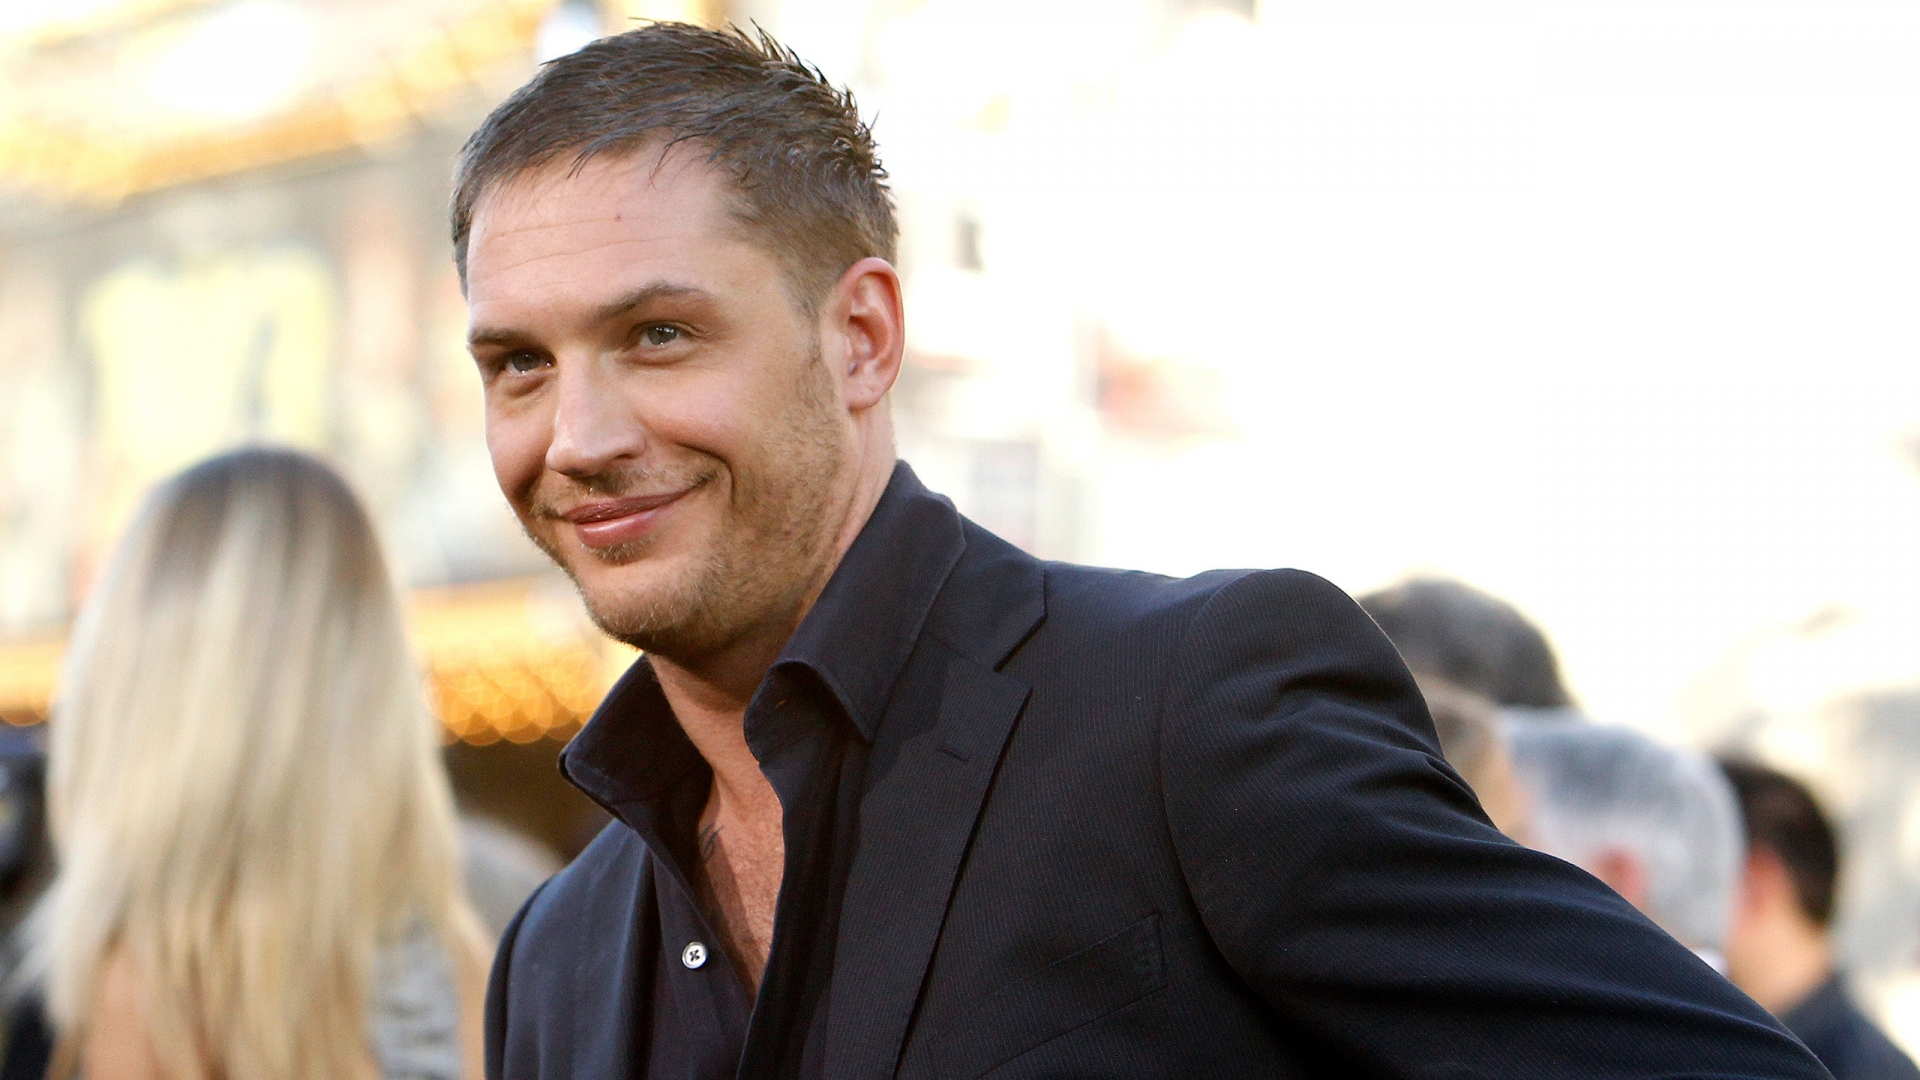 Cute Tom Hardy for 1920 x 1080 HDTV 1080p resolution